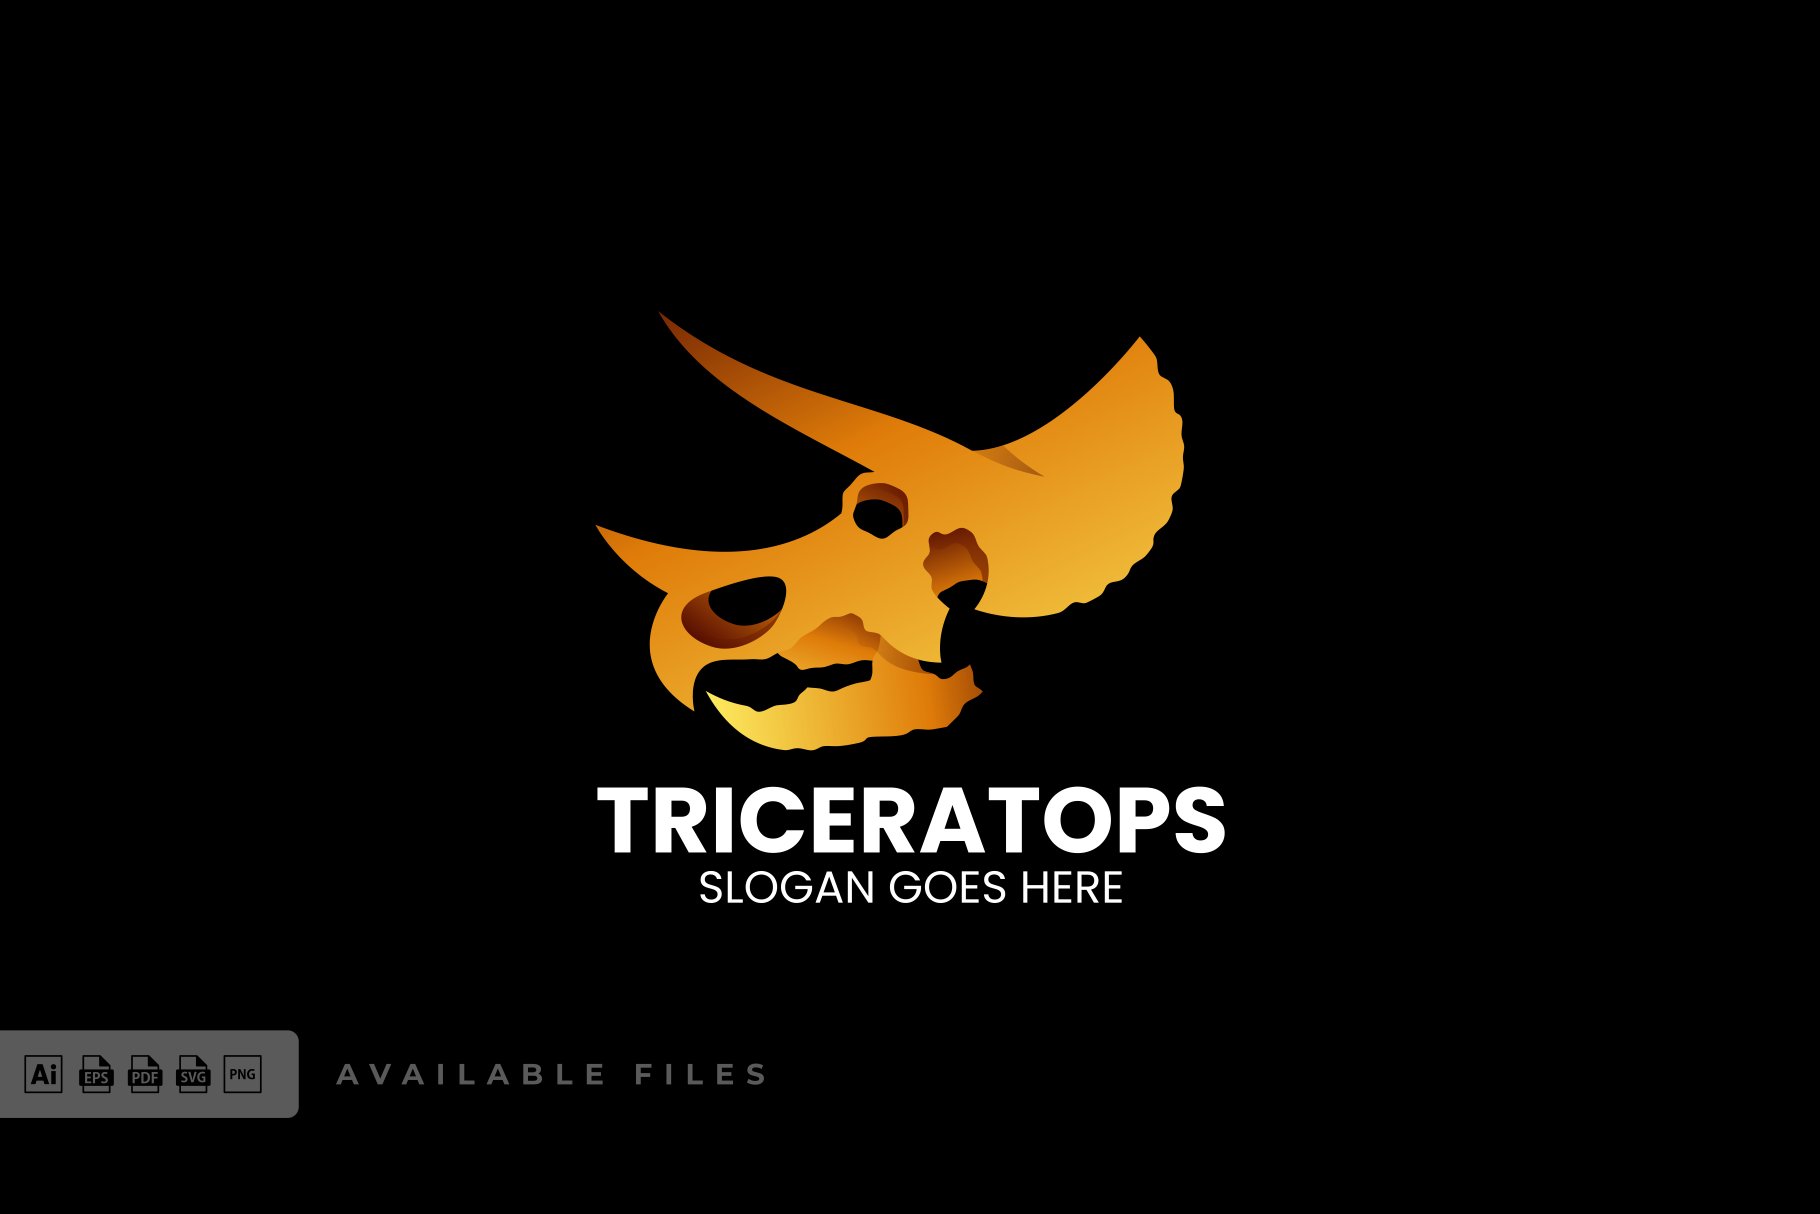 Triceratops Colorful Logo cover image.